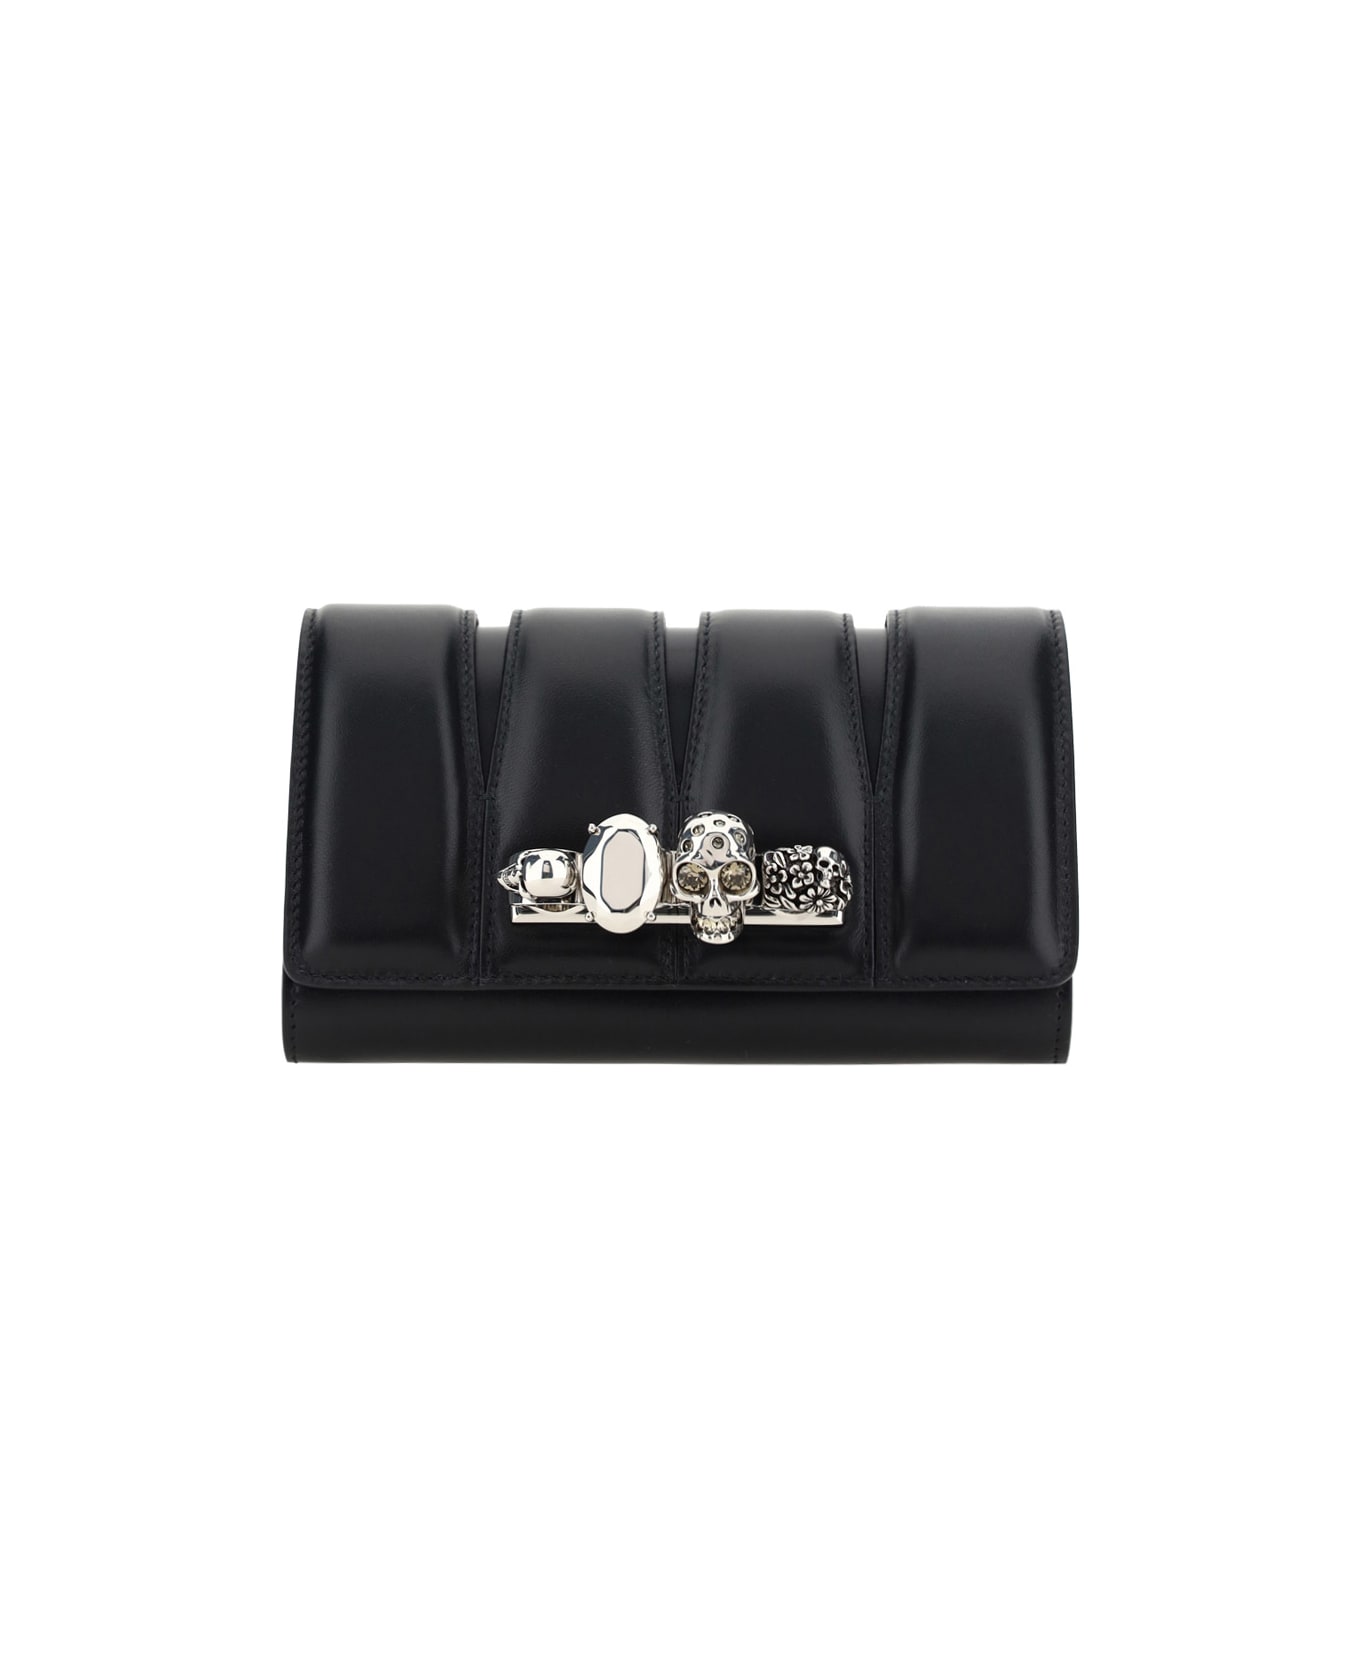 Alexander McQueen 'the Slush' Clutch With Skull Detail In Leather Woman - Black クラッチバッグ